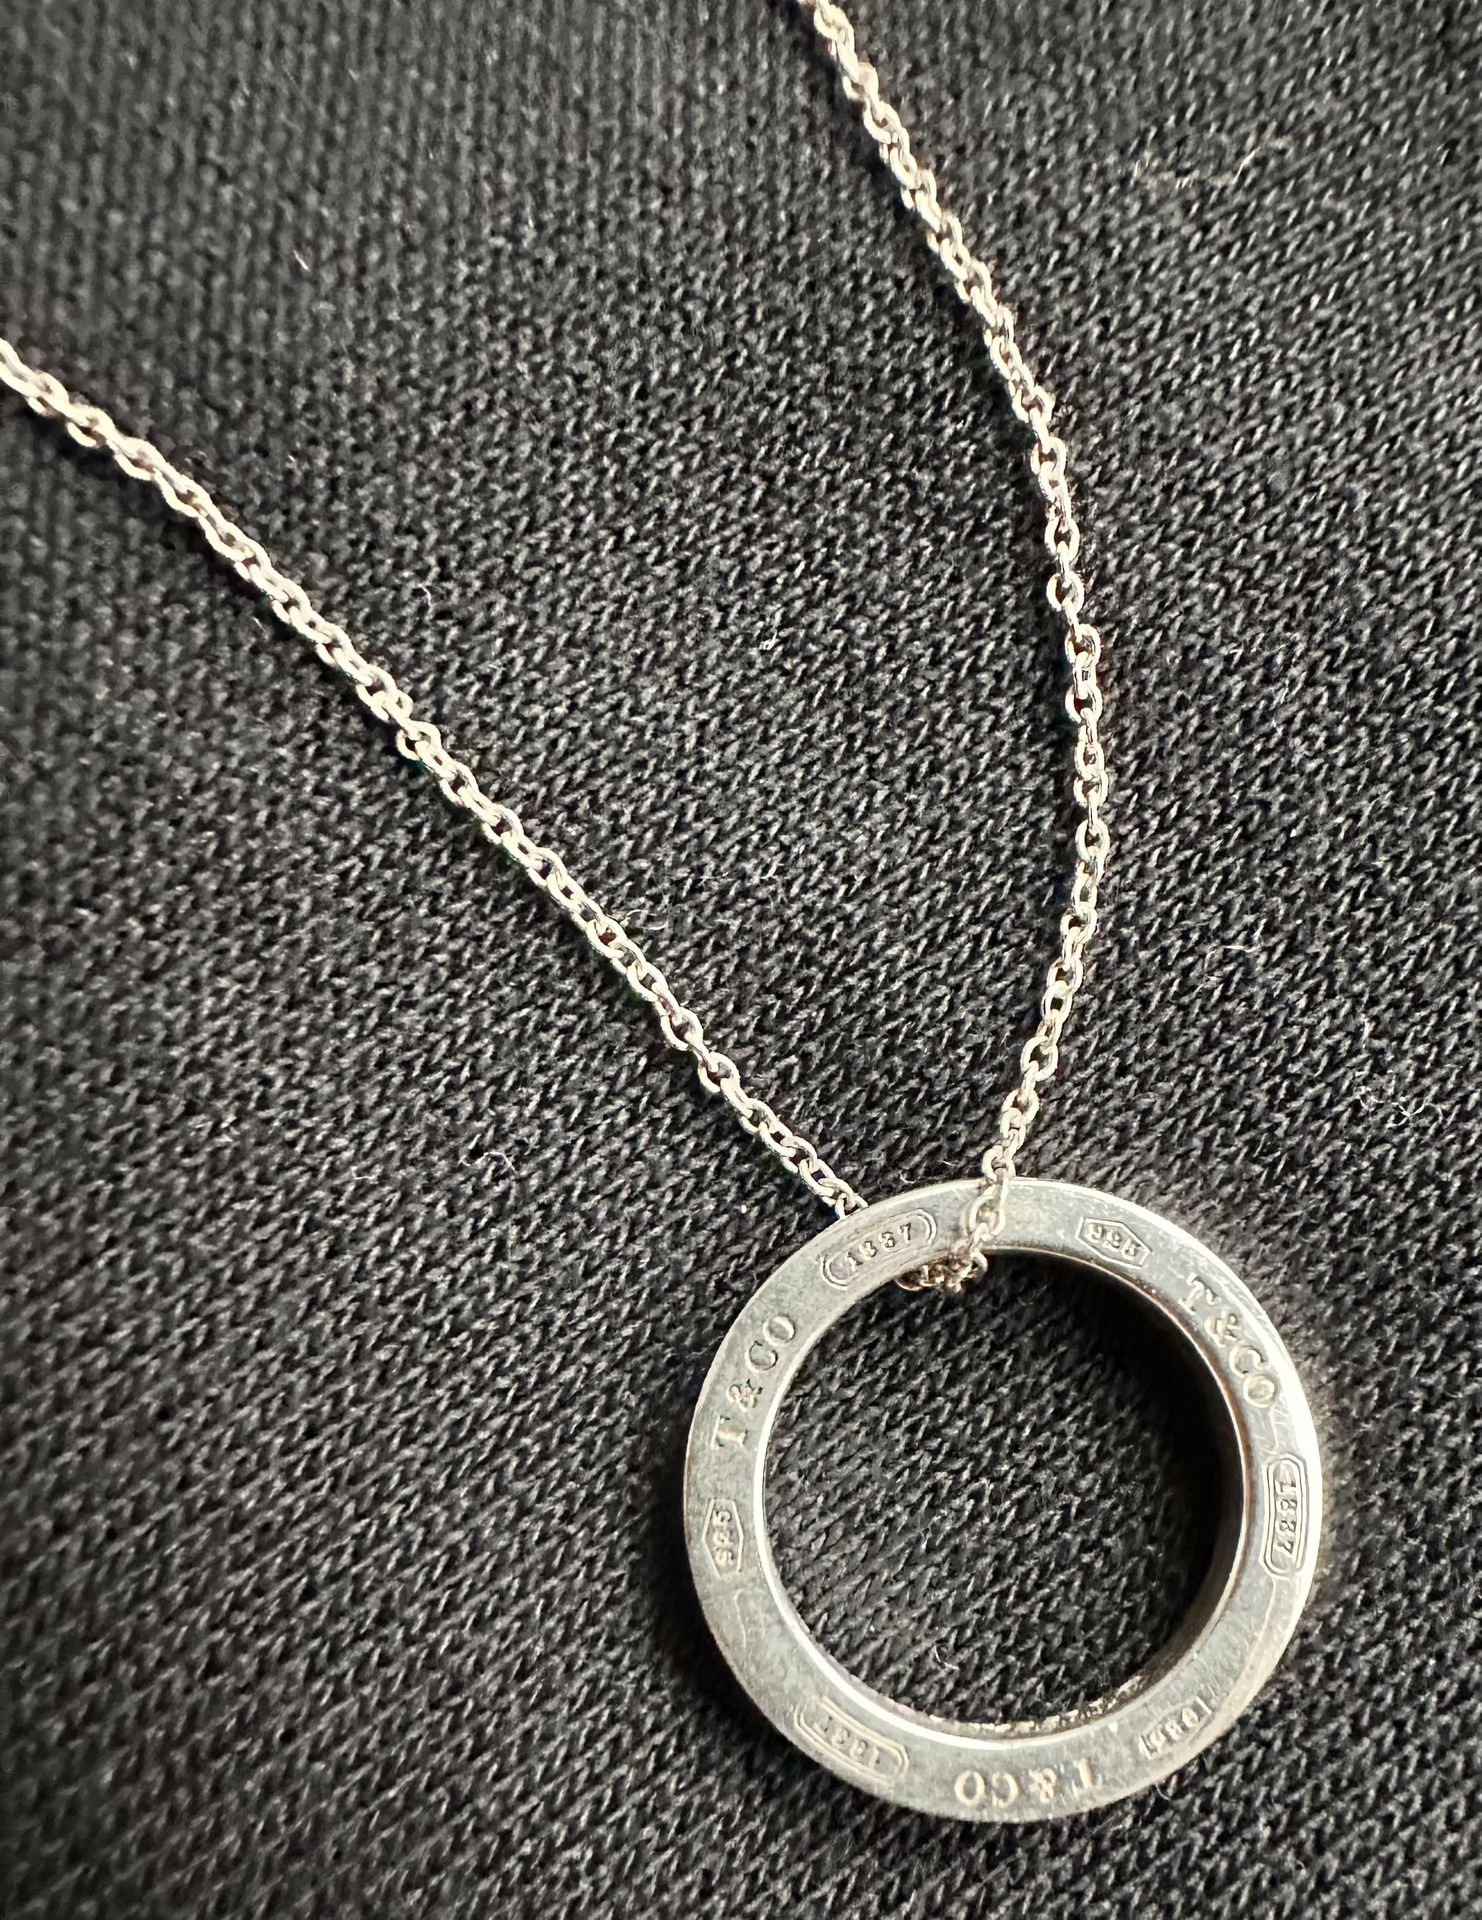 Authentic Tiffany & Co Sterling Silver 1837 Circle Pendant Necklace